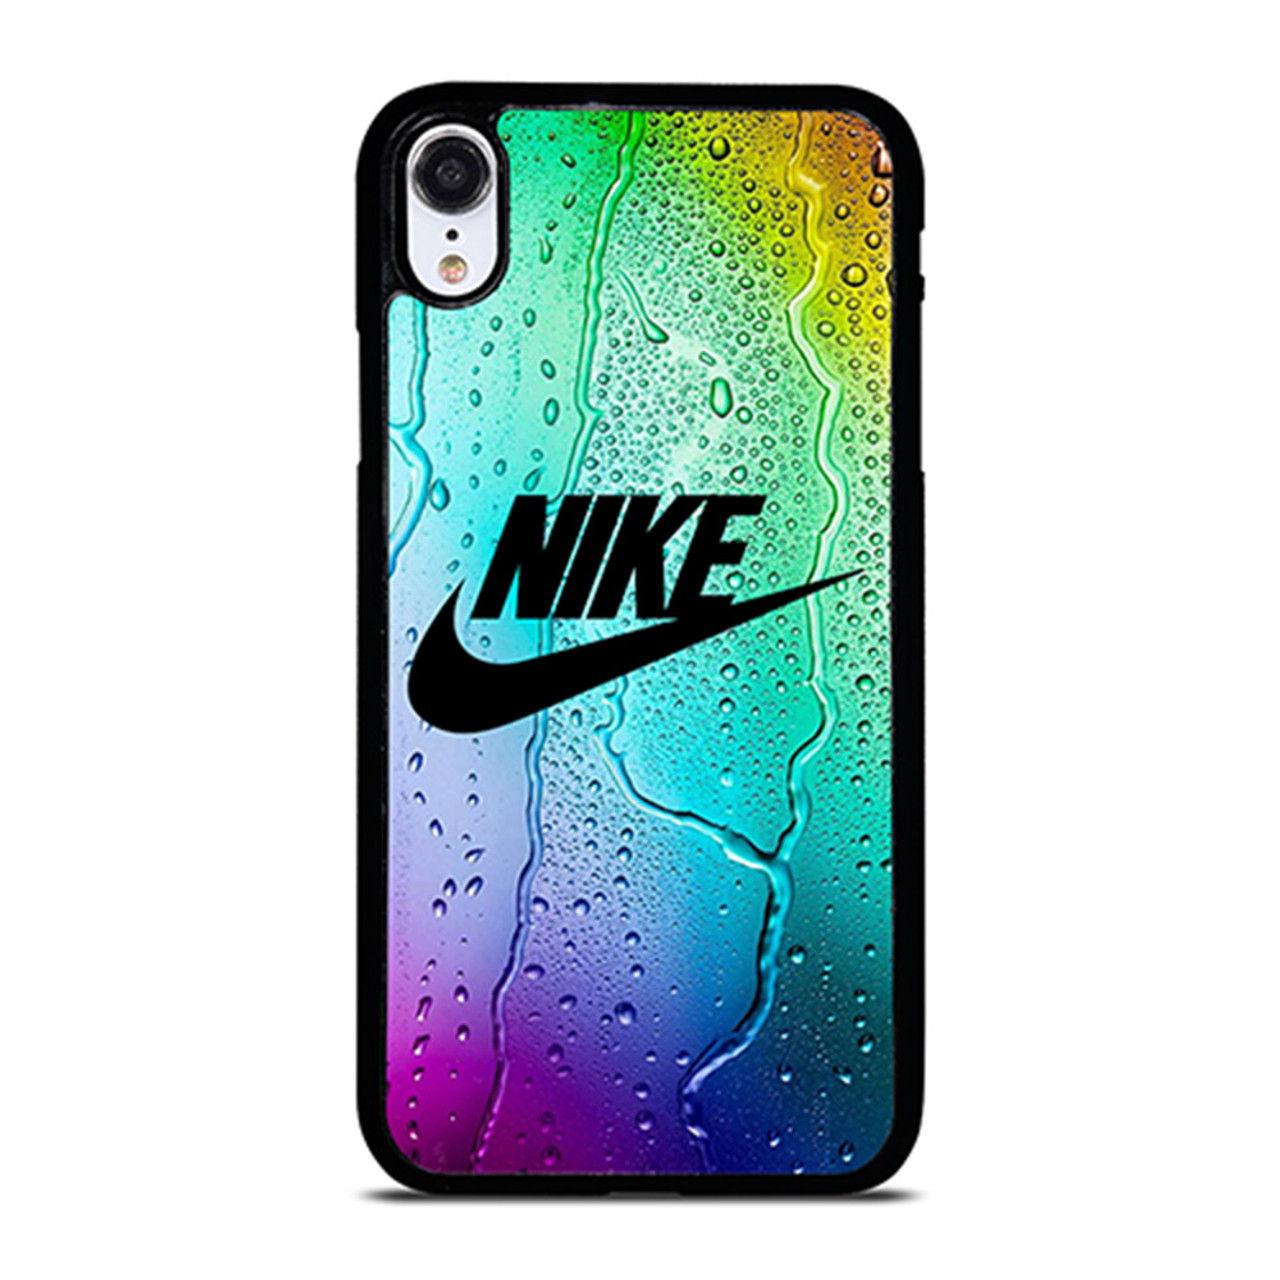 Nike Rainbow Drops Iphone Xr Case Cover